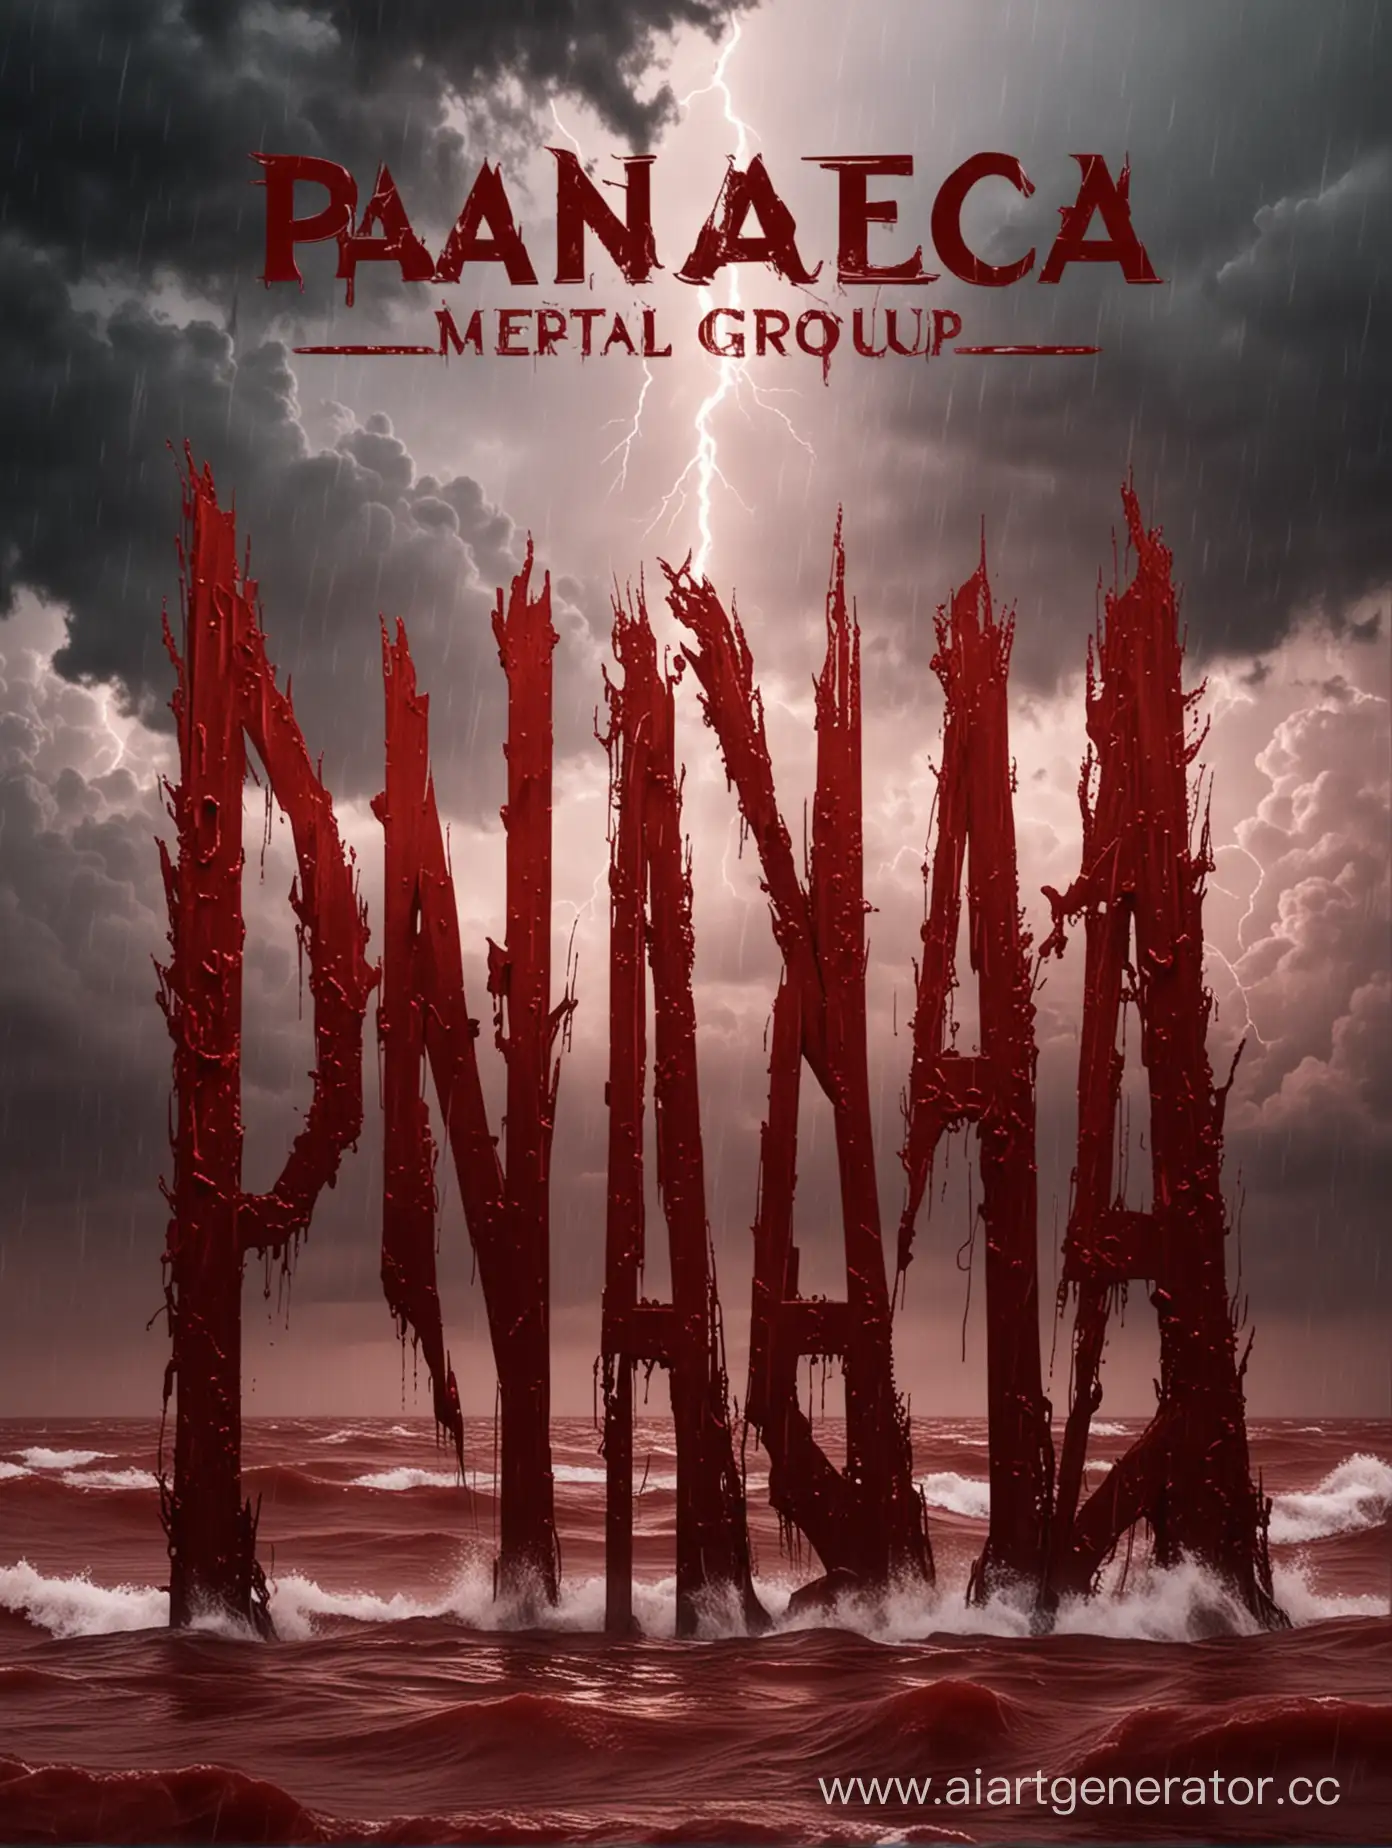 Metal-Band-PANACEA-on-Stormy-Red-Background-4k-Cover-Art